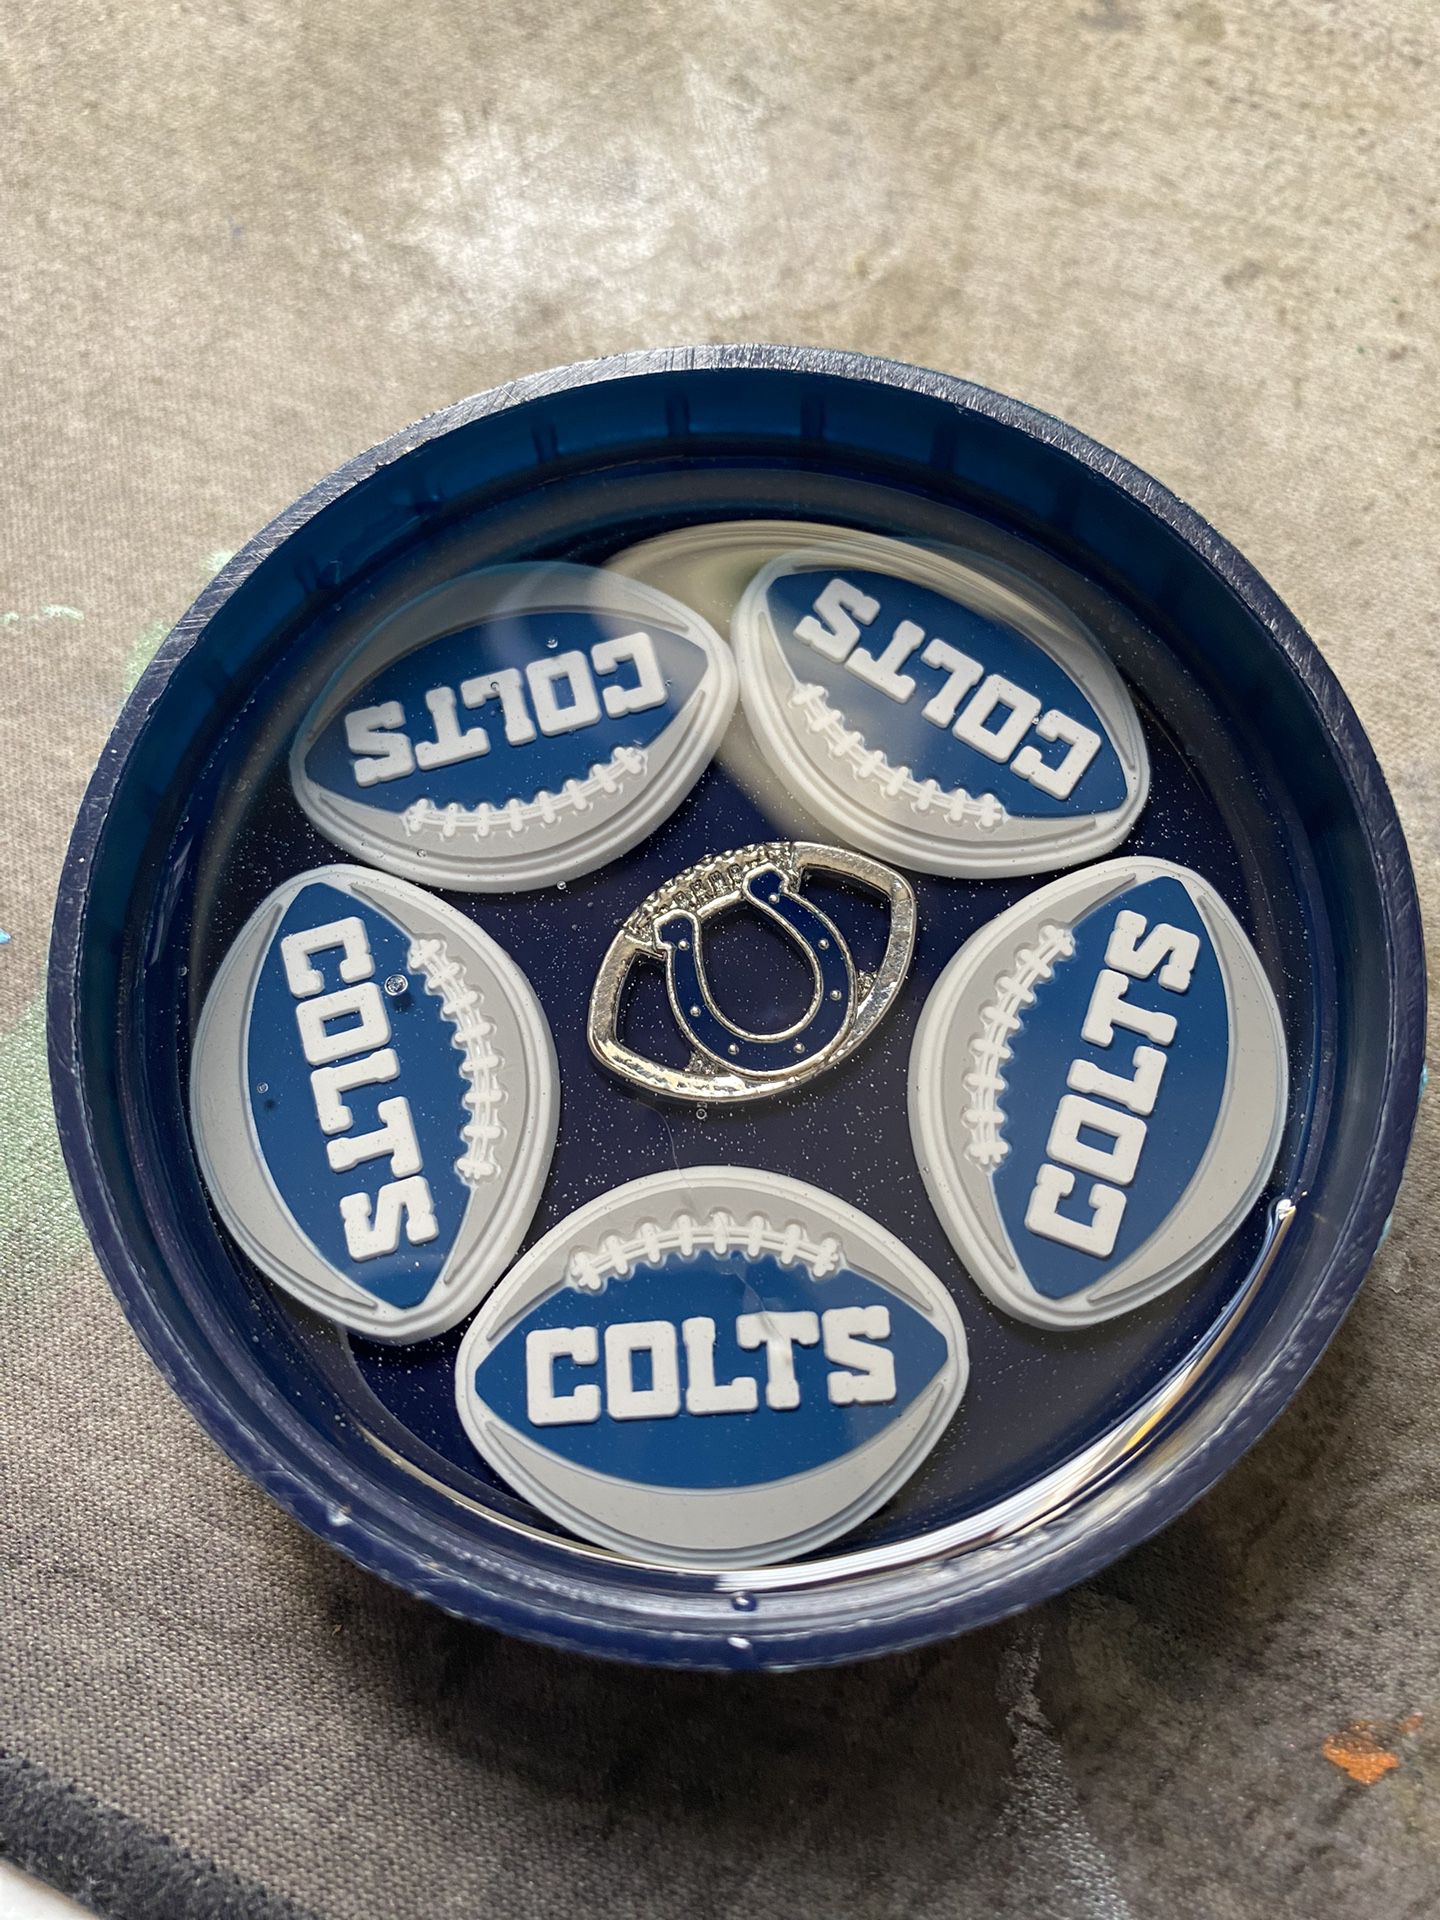 Indianapolis Colts resin lid coaster\paperweight